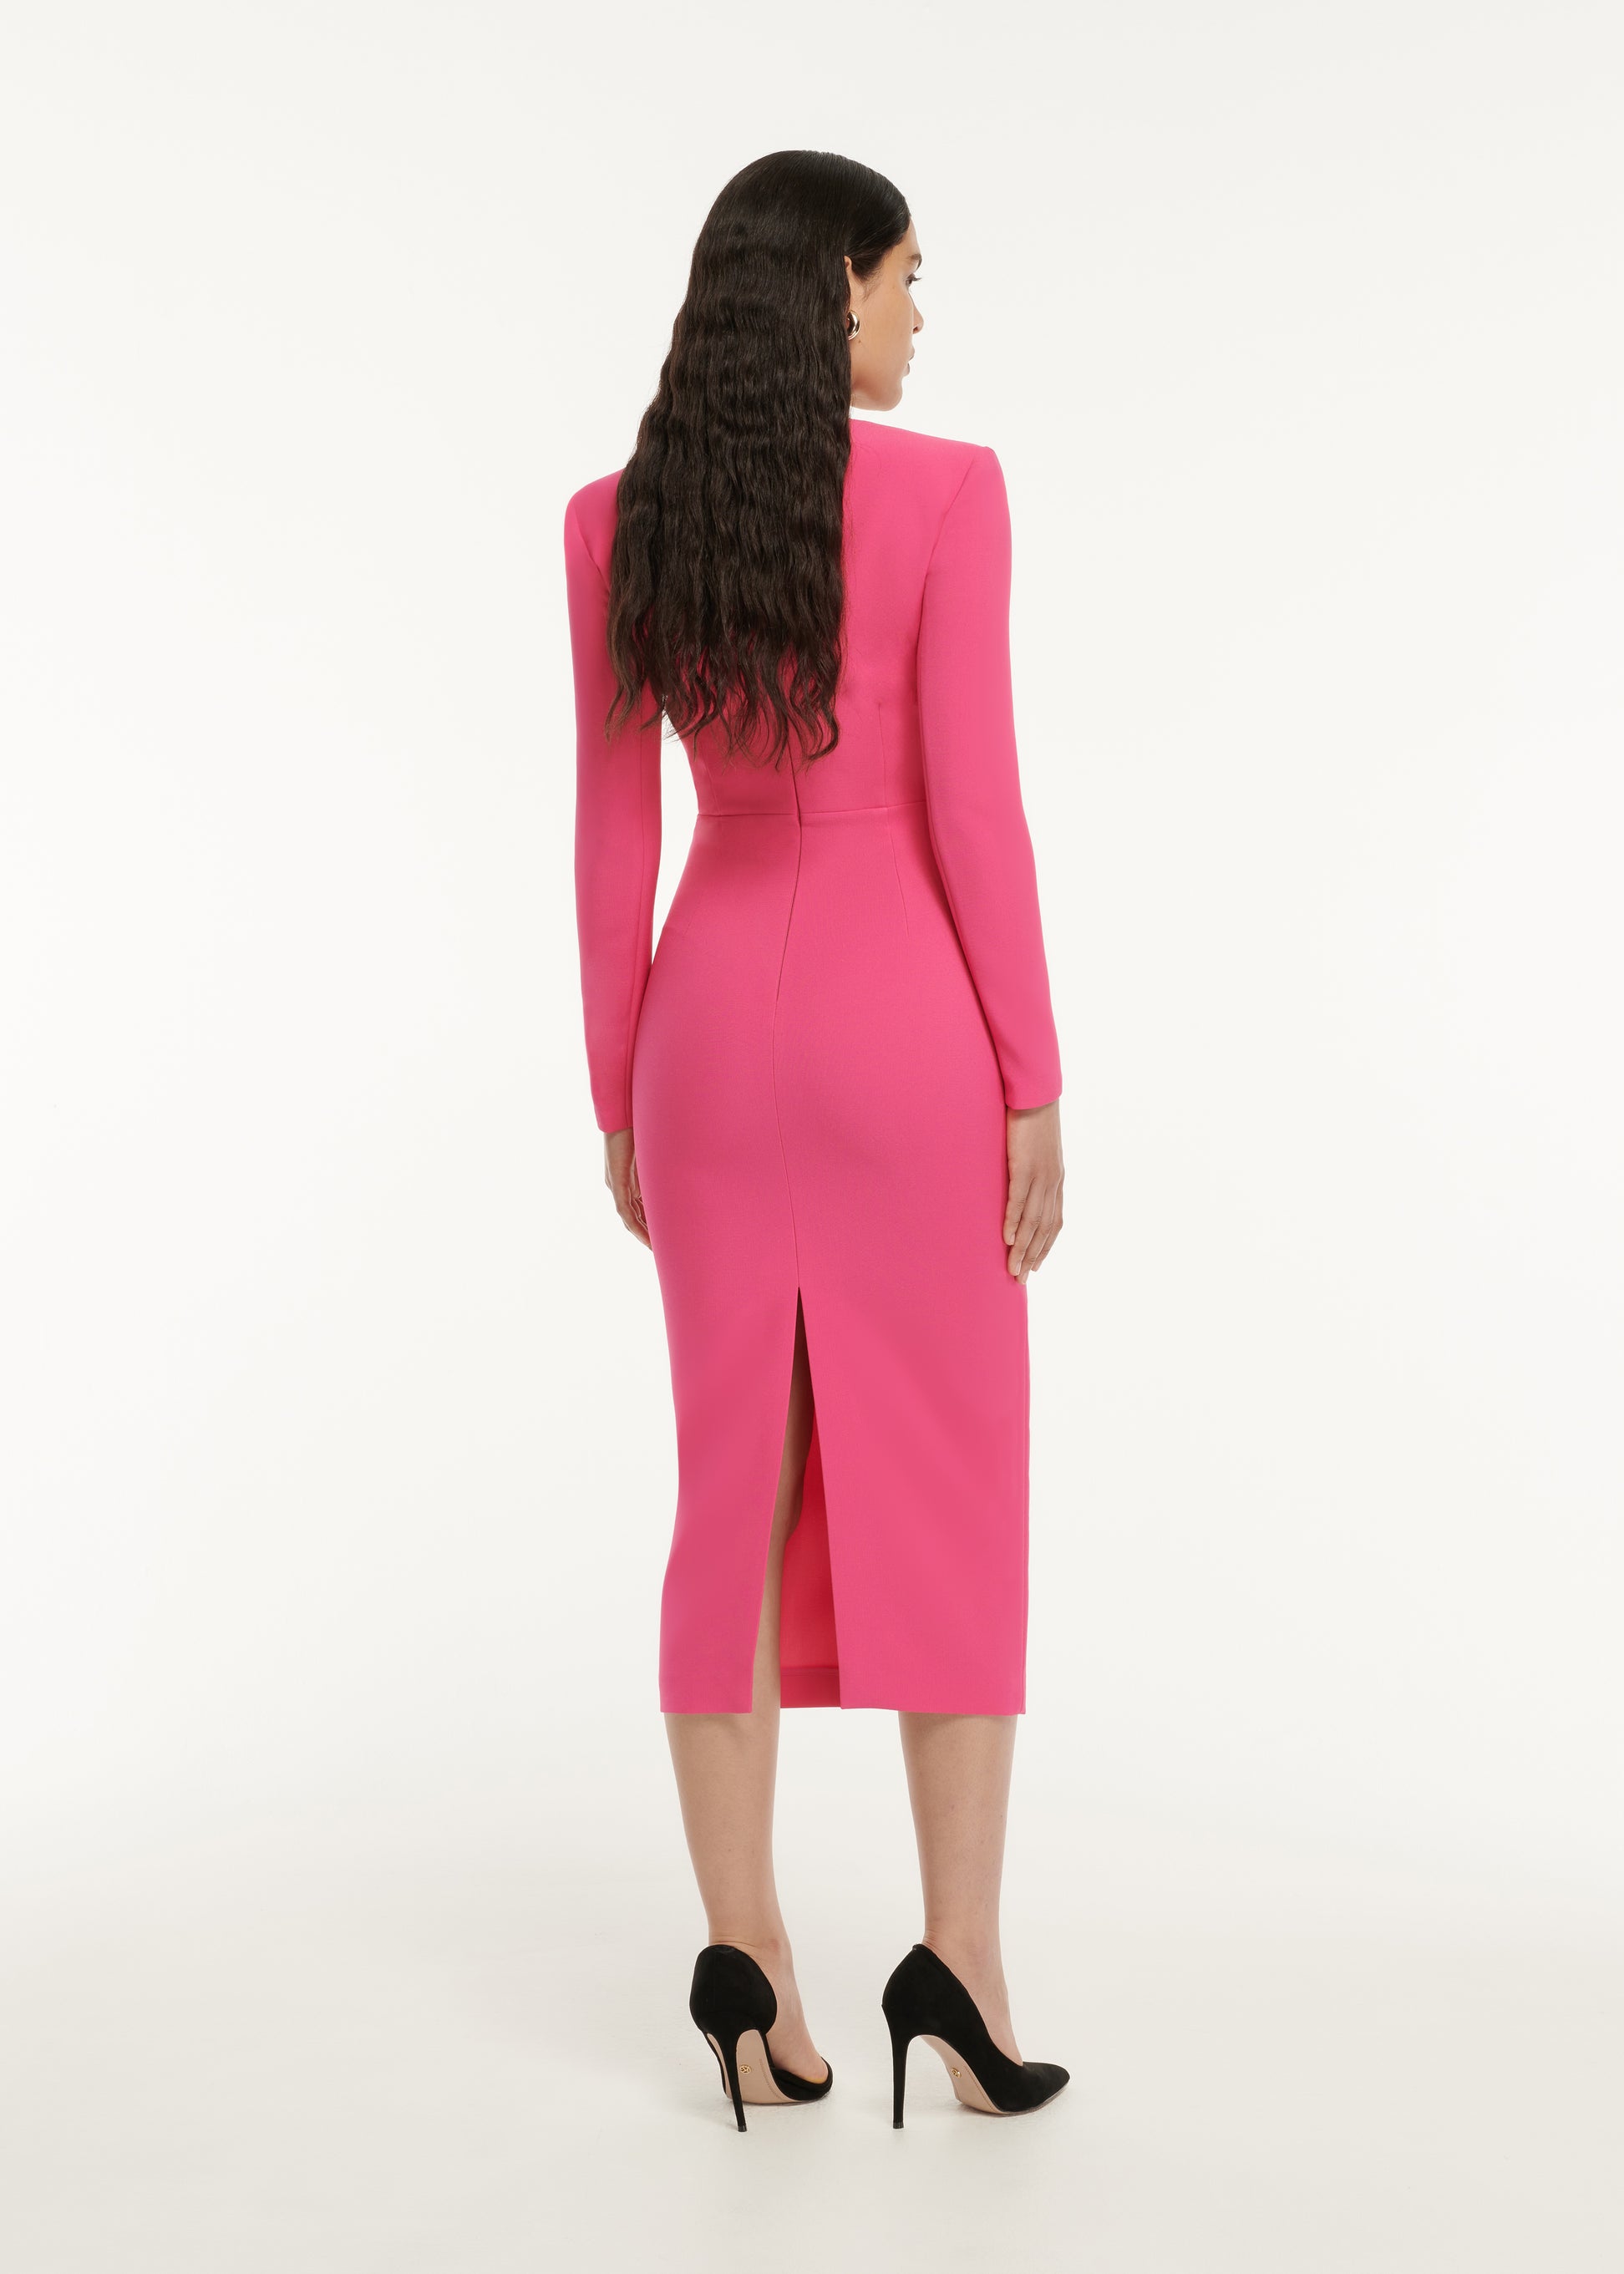 The back of a woman wearing the Long Sleeve Pleat Detail Crepe Midi Dress